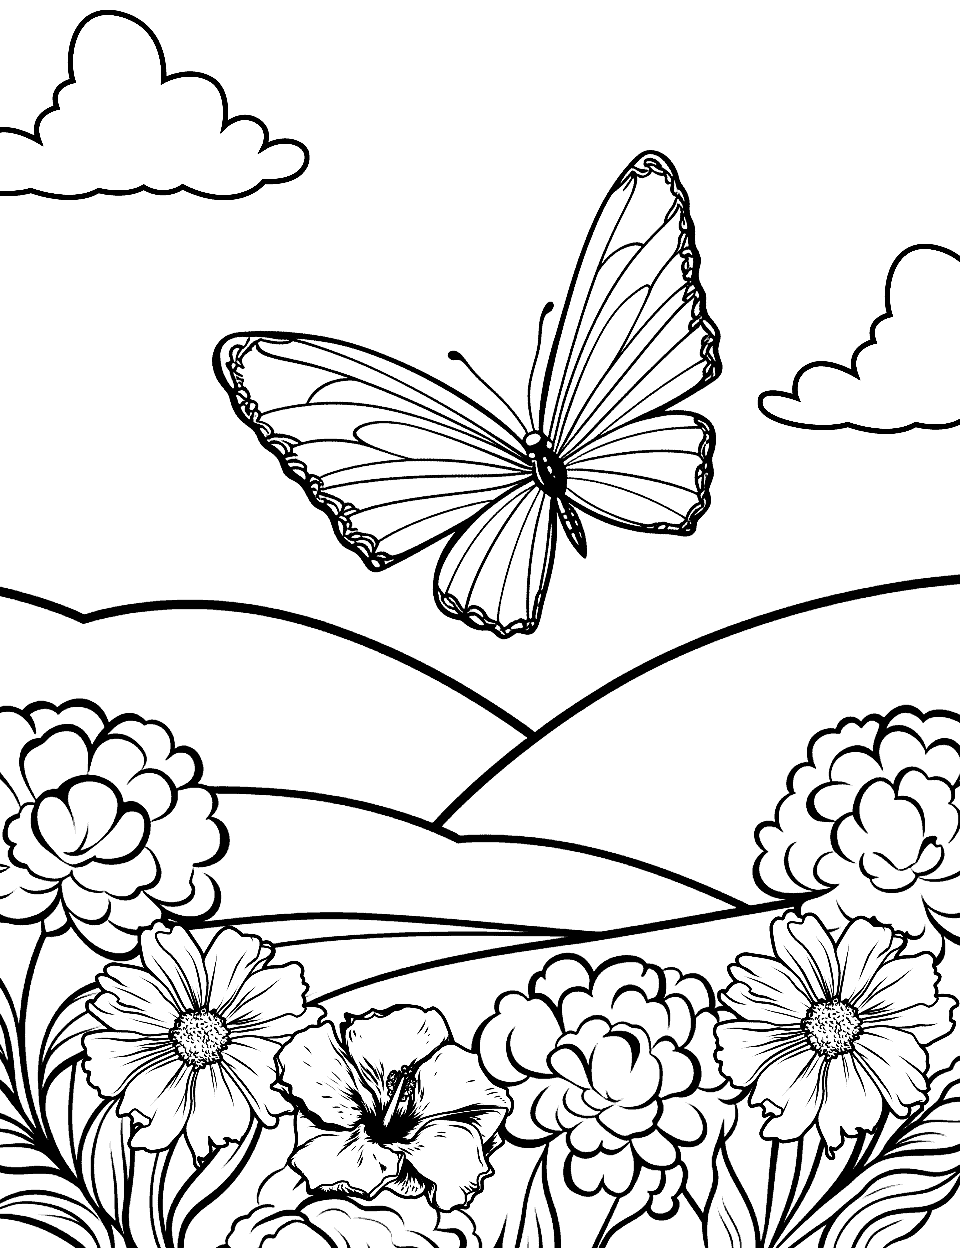 Butterfly Flying Nature Coloring Page - A delicate butterfly flying over flowers in a lush garden.